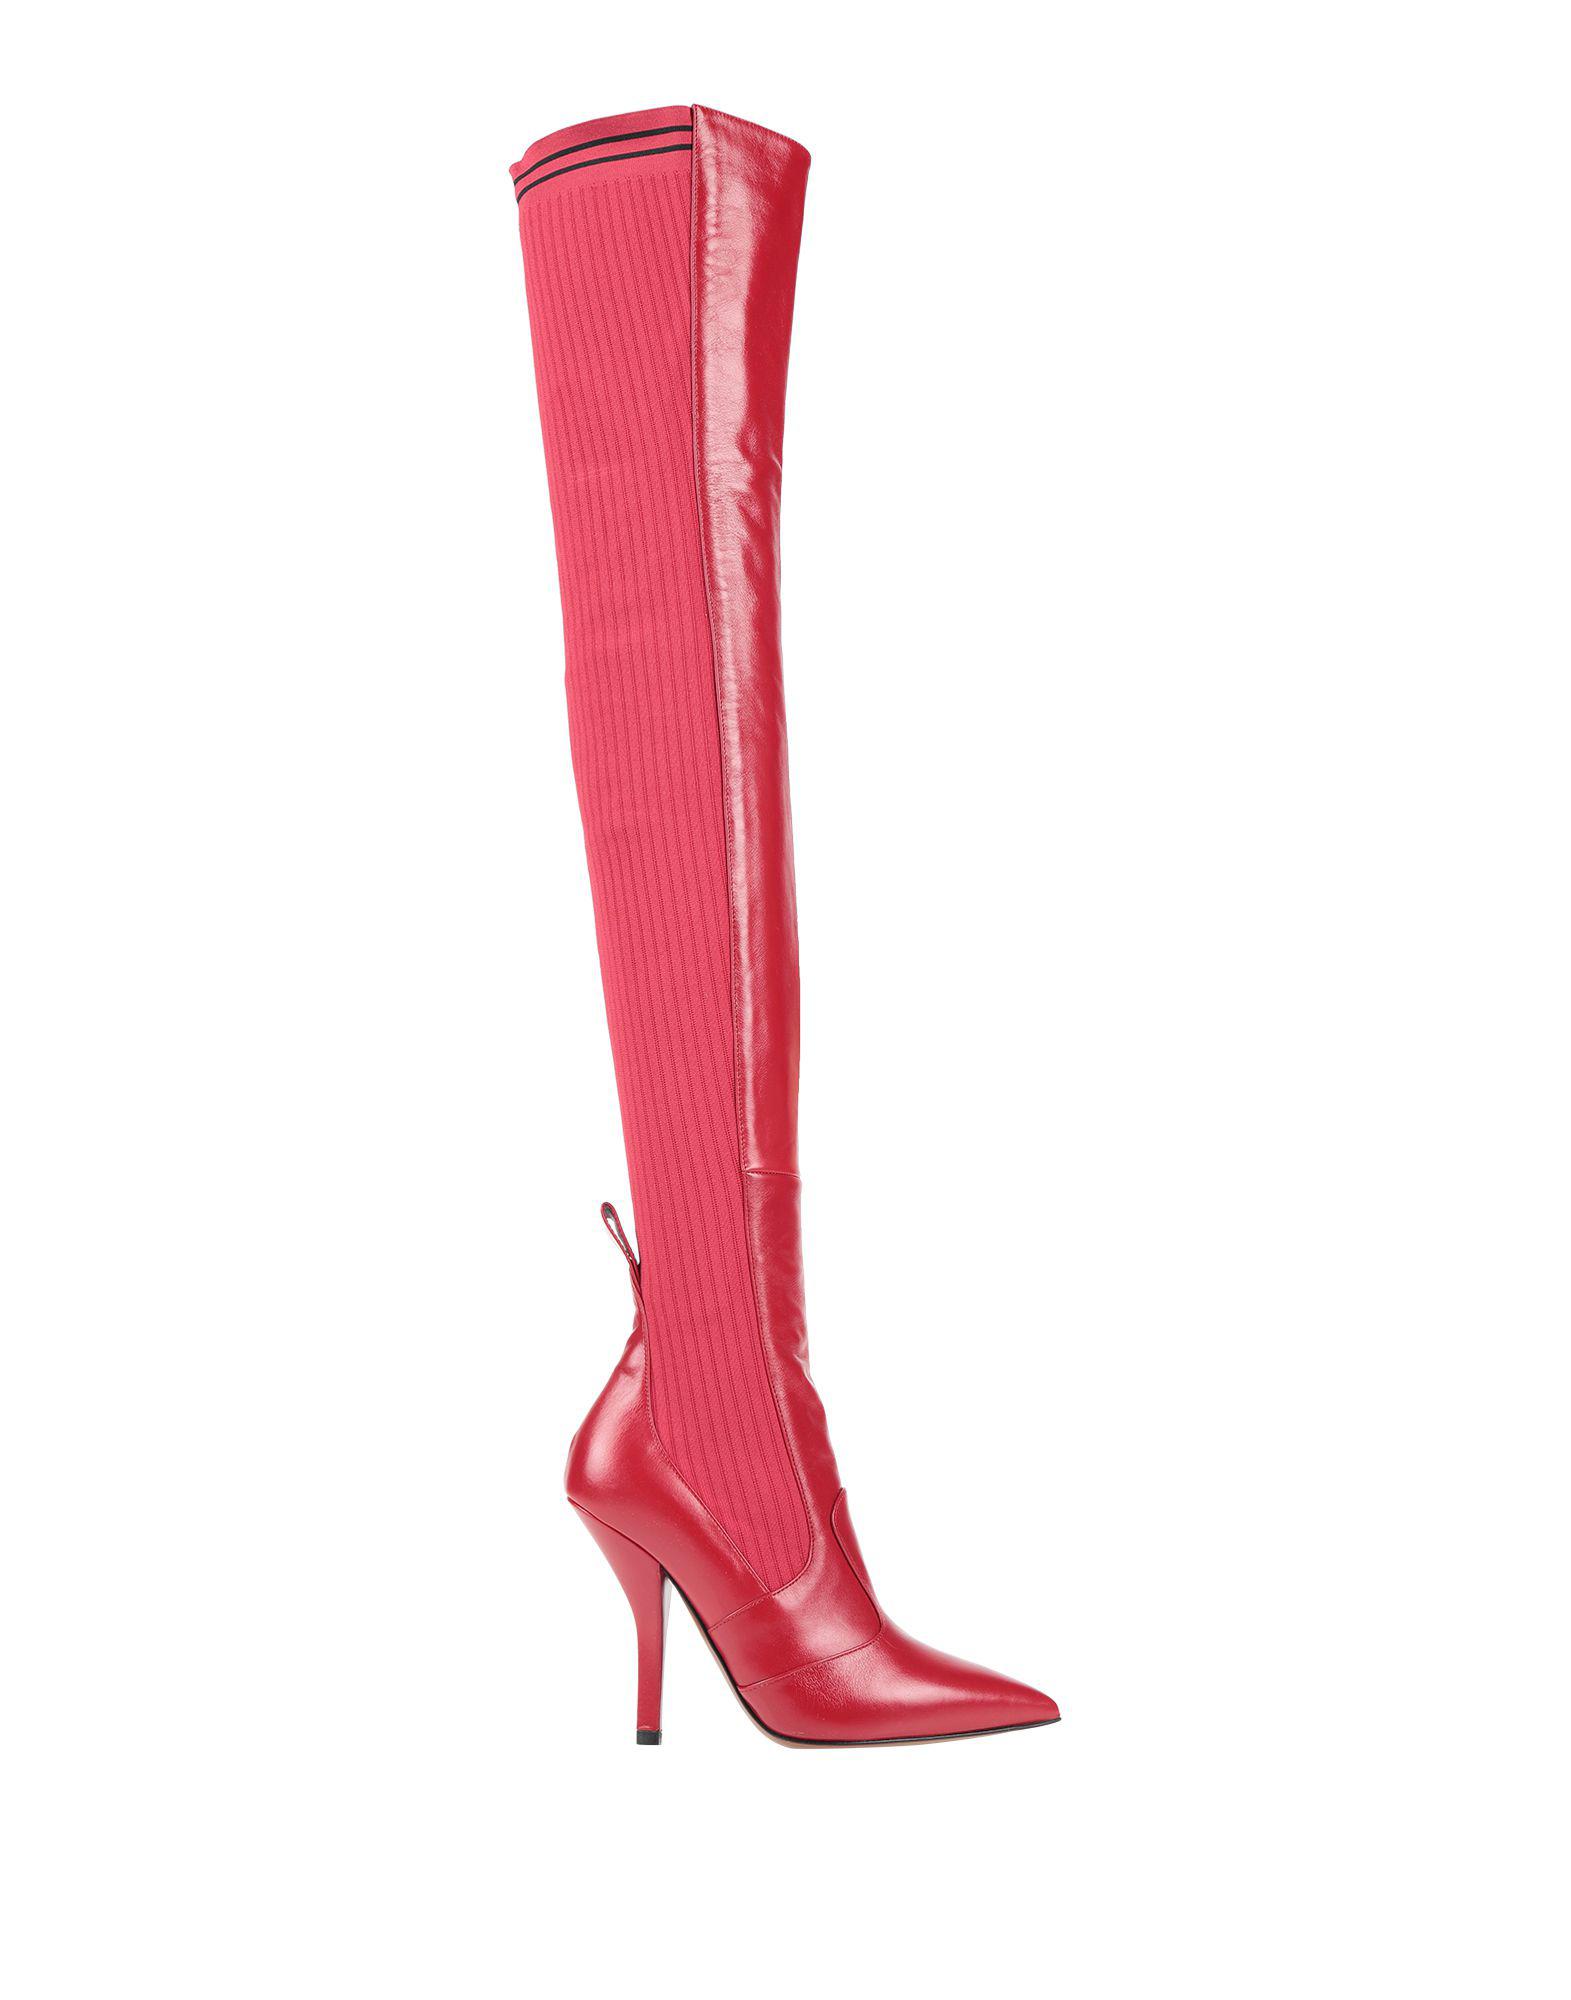 Fendi Rockoko 100mm Thigh-high Boots in Red | Lyst